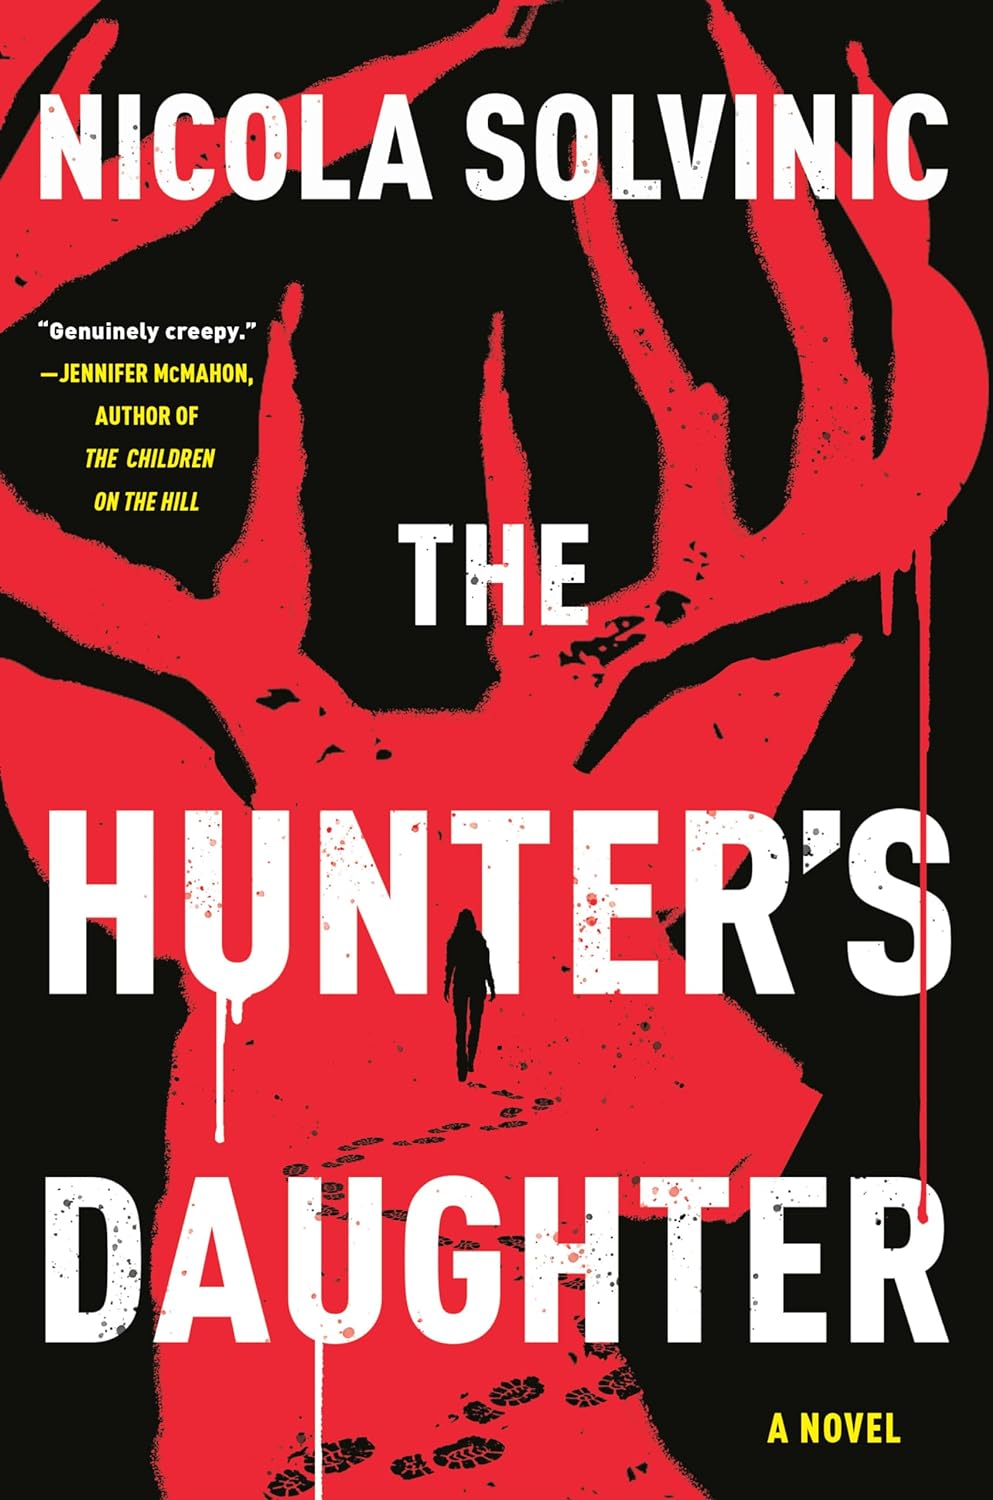 Image for "The Hunters Daughter"